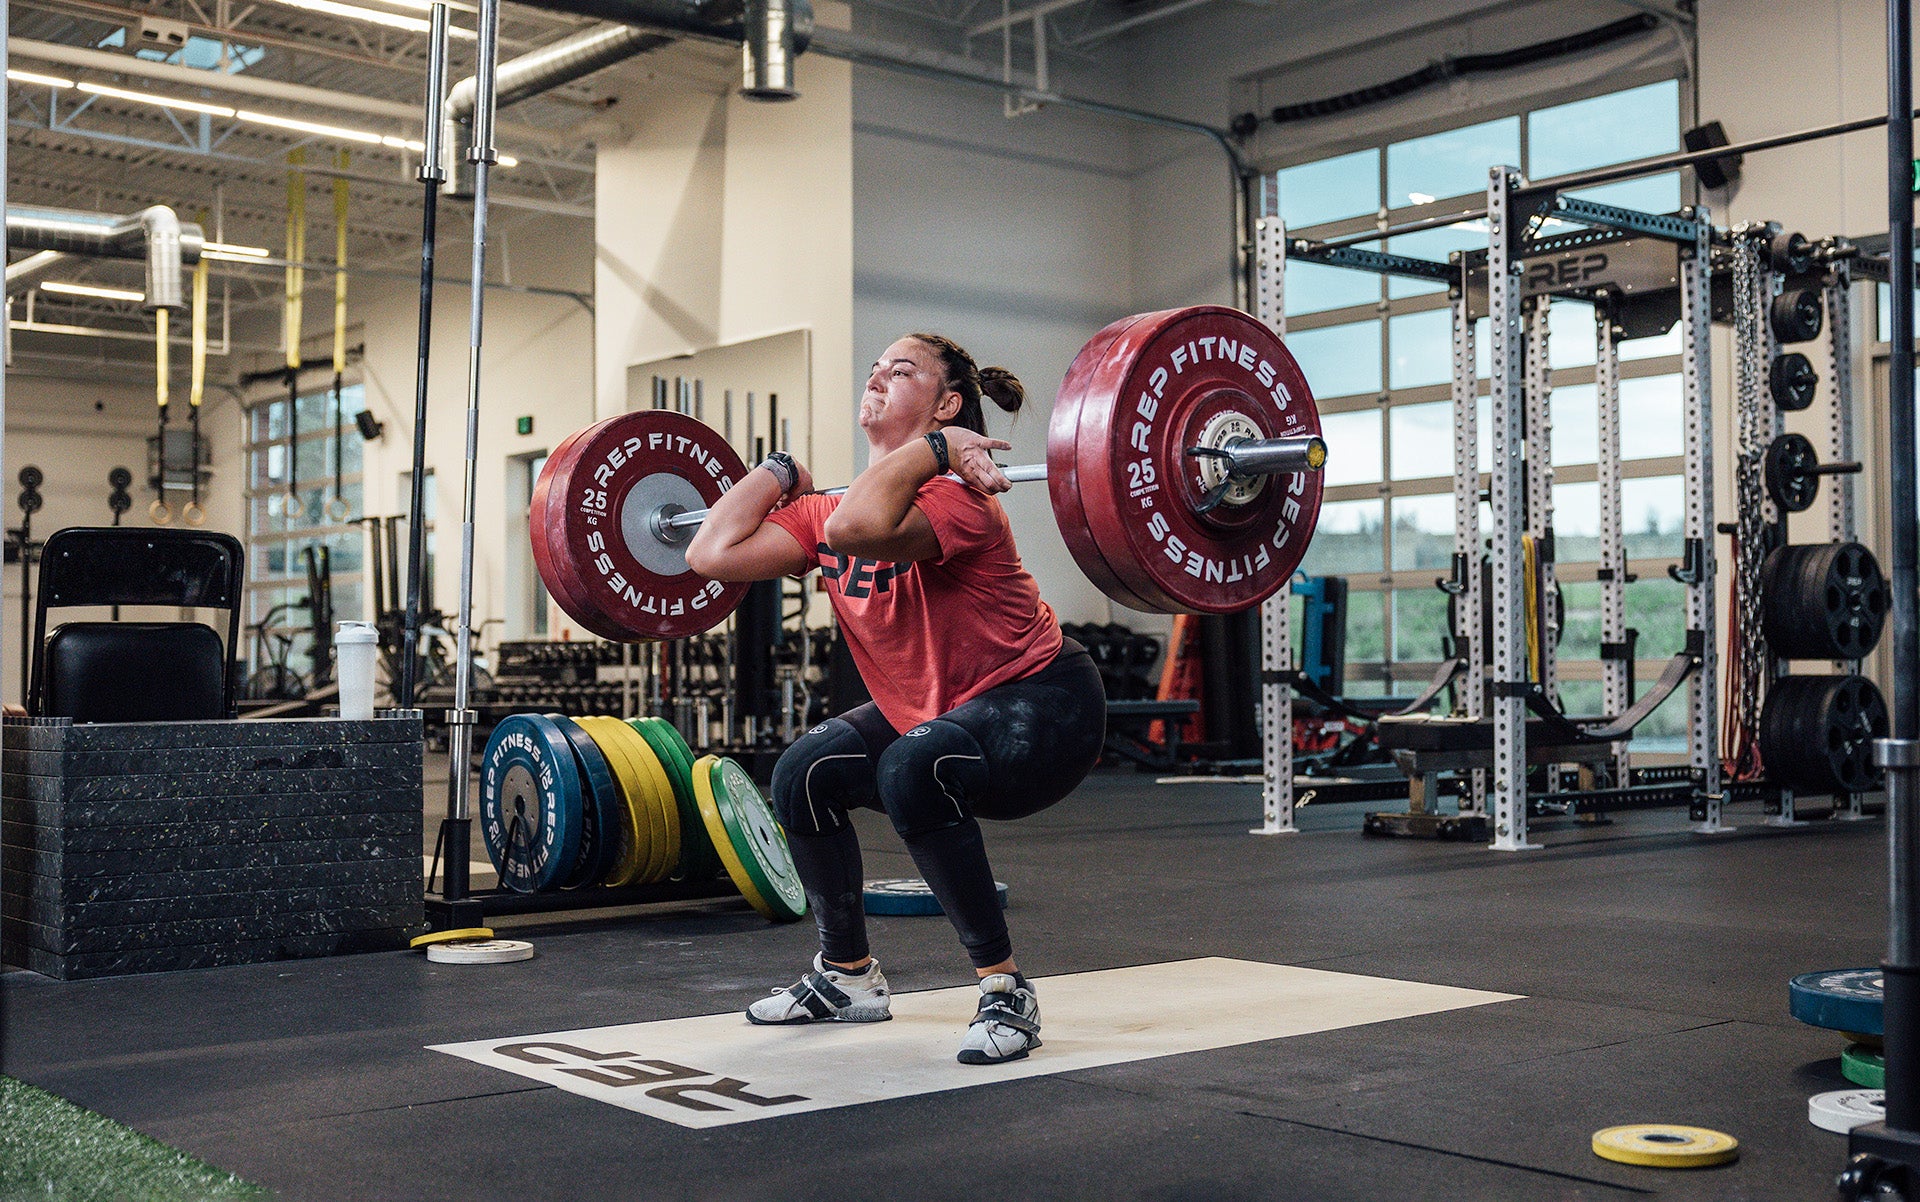 Female lifter performing a clean and jerk on an Olympic lifting platform using REP's 15kg Alpine Weightlifting Bar.